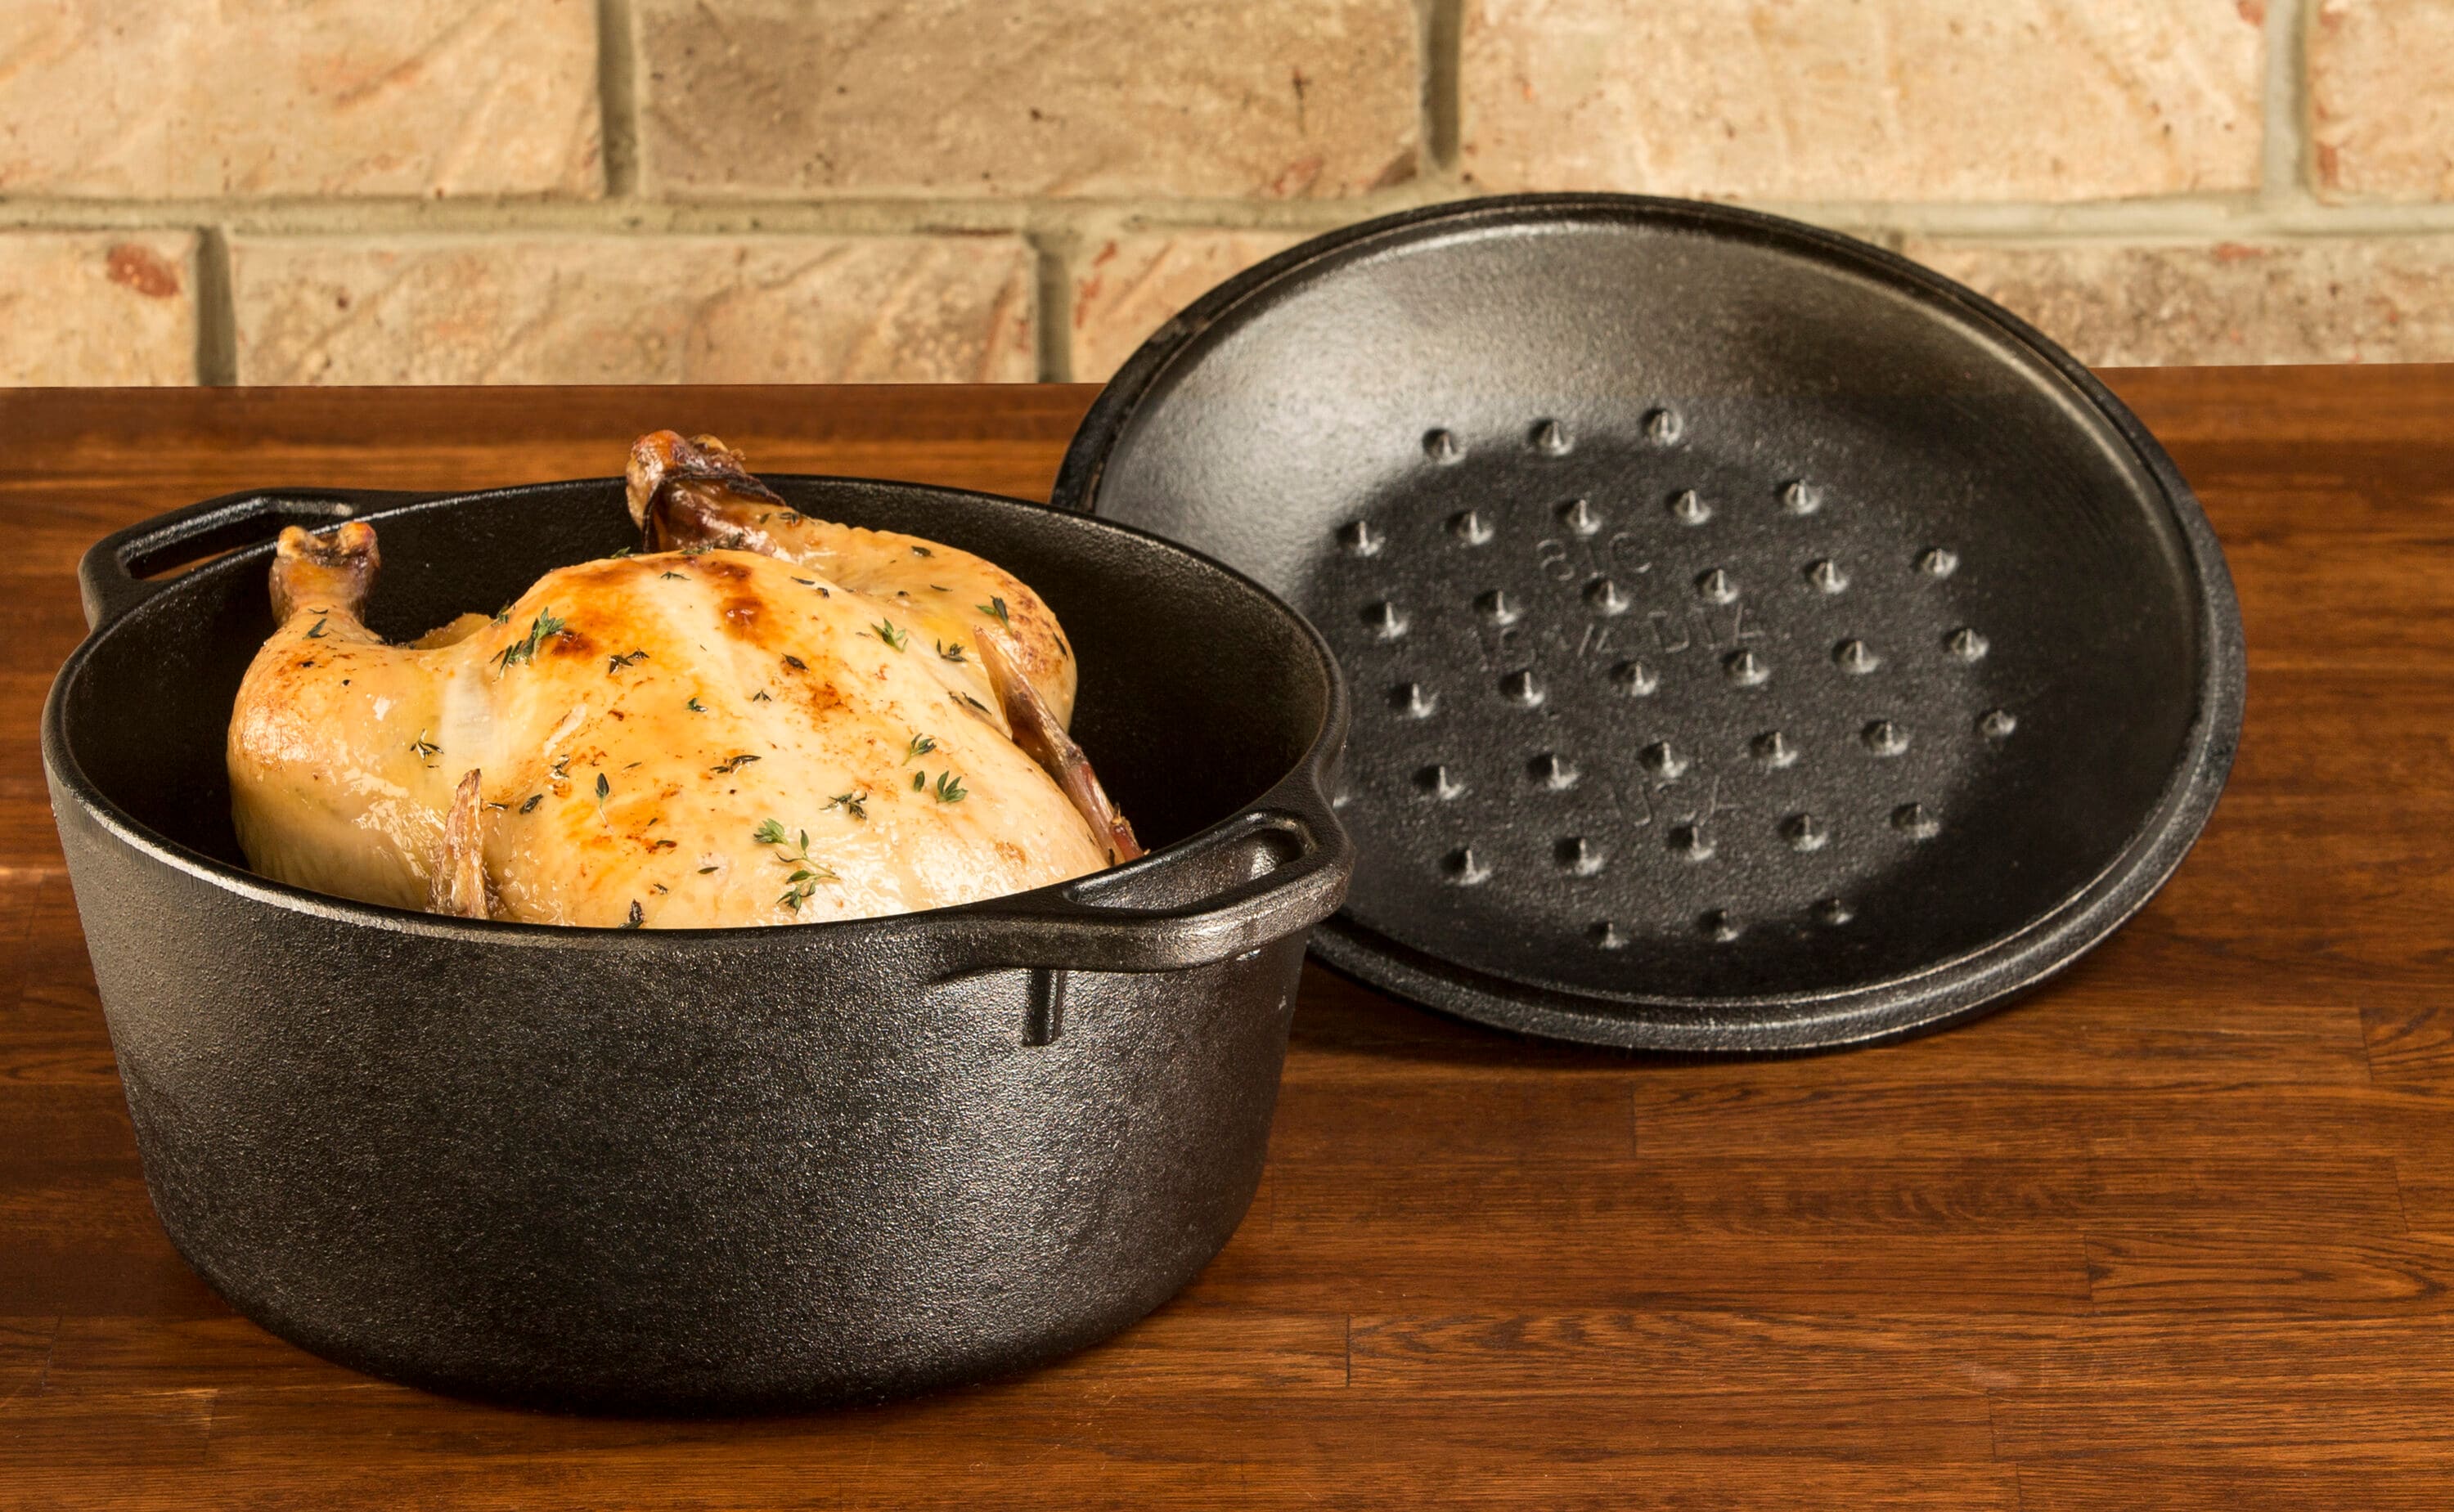 Lodge Cast Iron 5 Quart/10 Inch Cast Iron Dutch Oven - Oven Safe - Black -  Lid Included - Ideal for Slow-Roasting, Simmering, and Baking in the  Cooking Pots department at